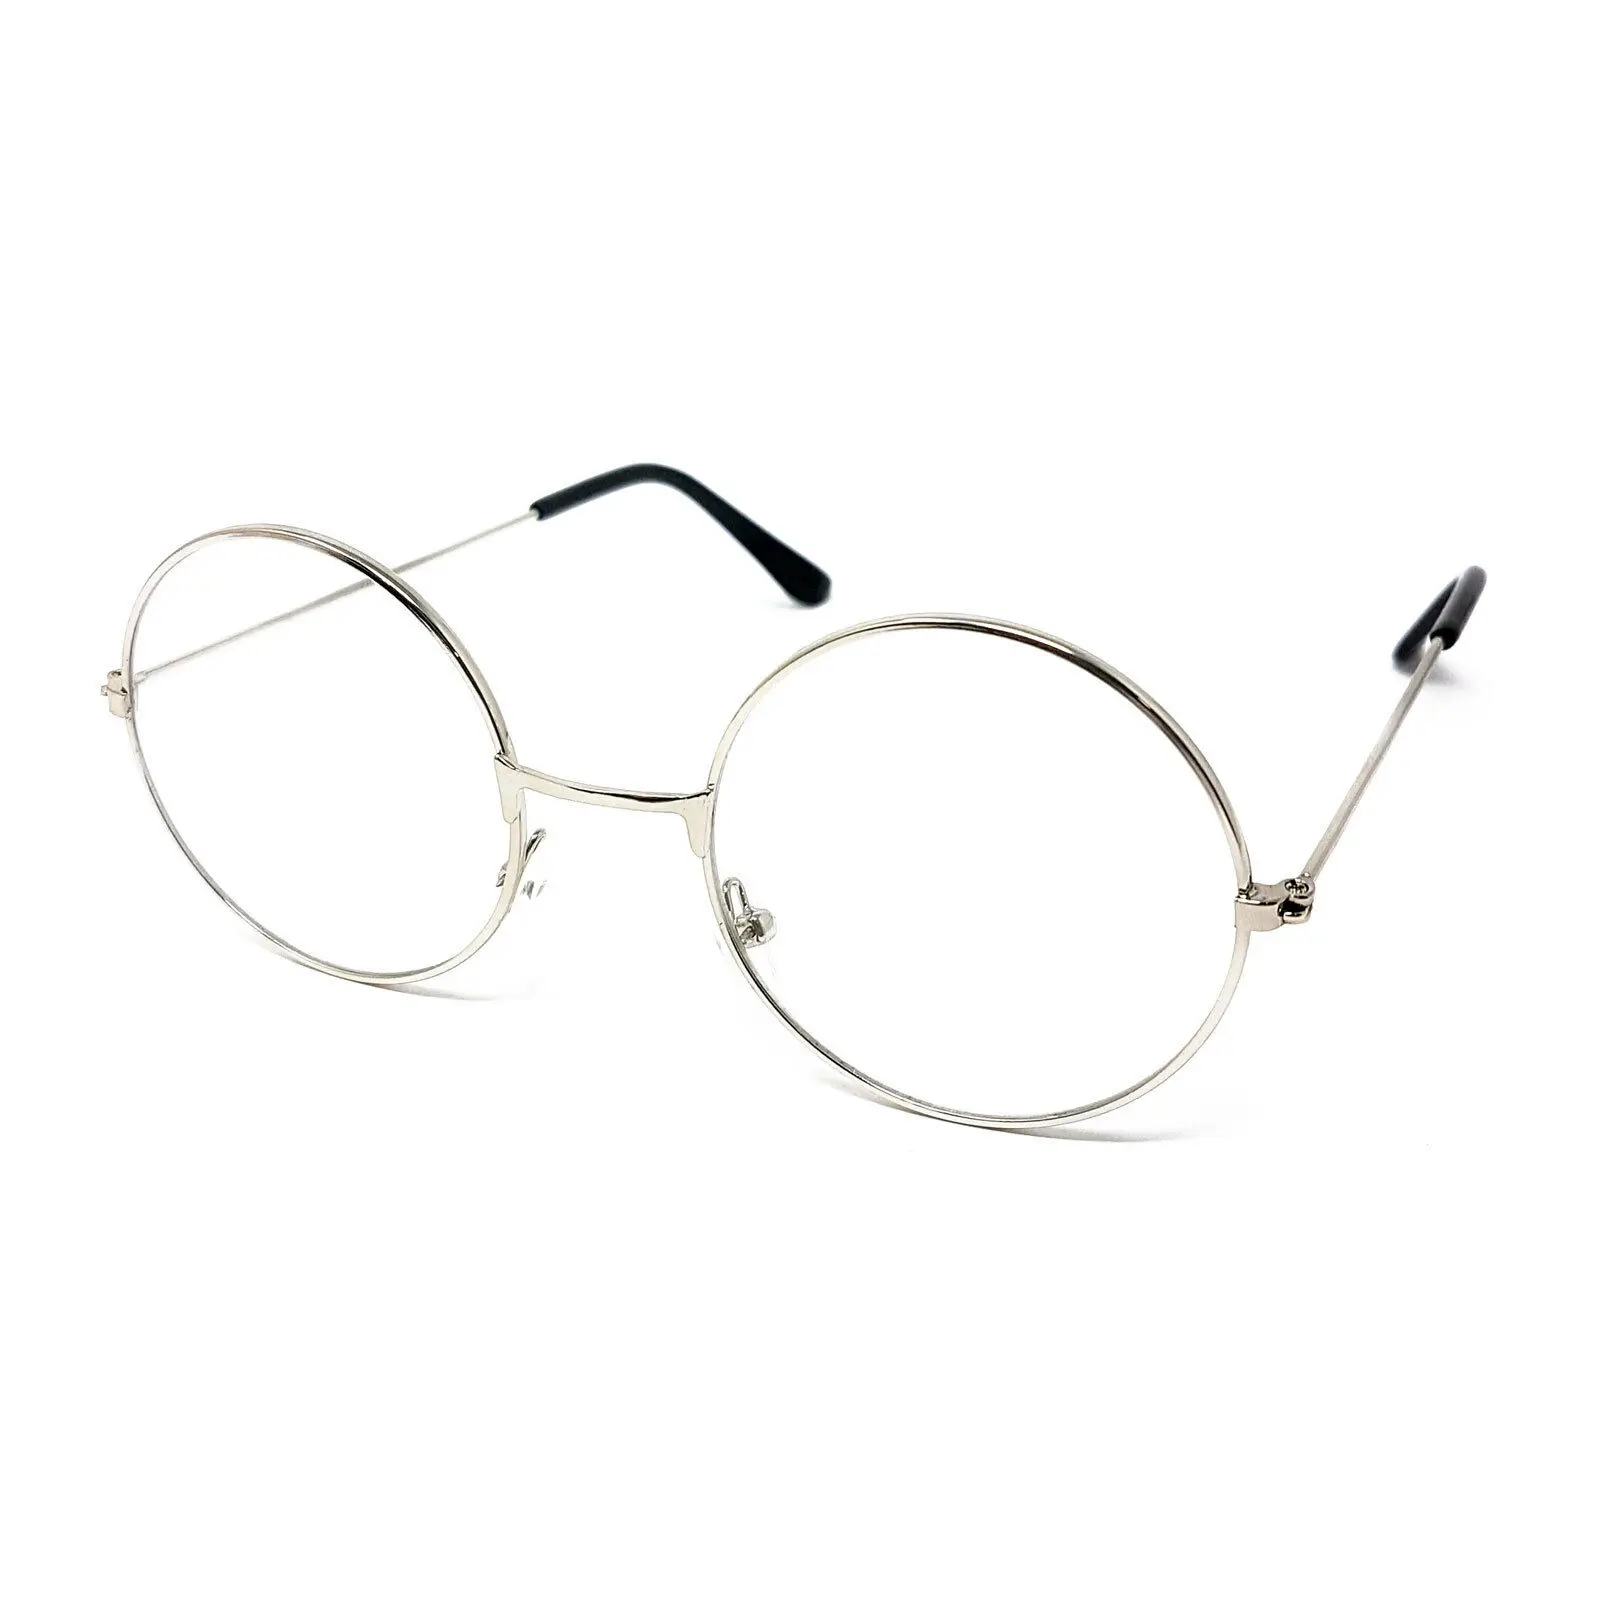 Clear Lenses Round Black Glasses Fancy Dress Accessory 